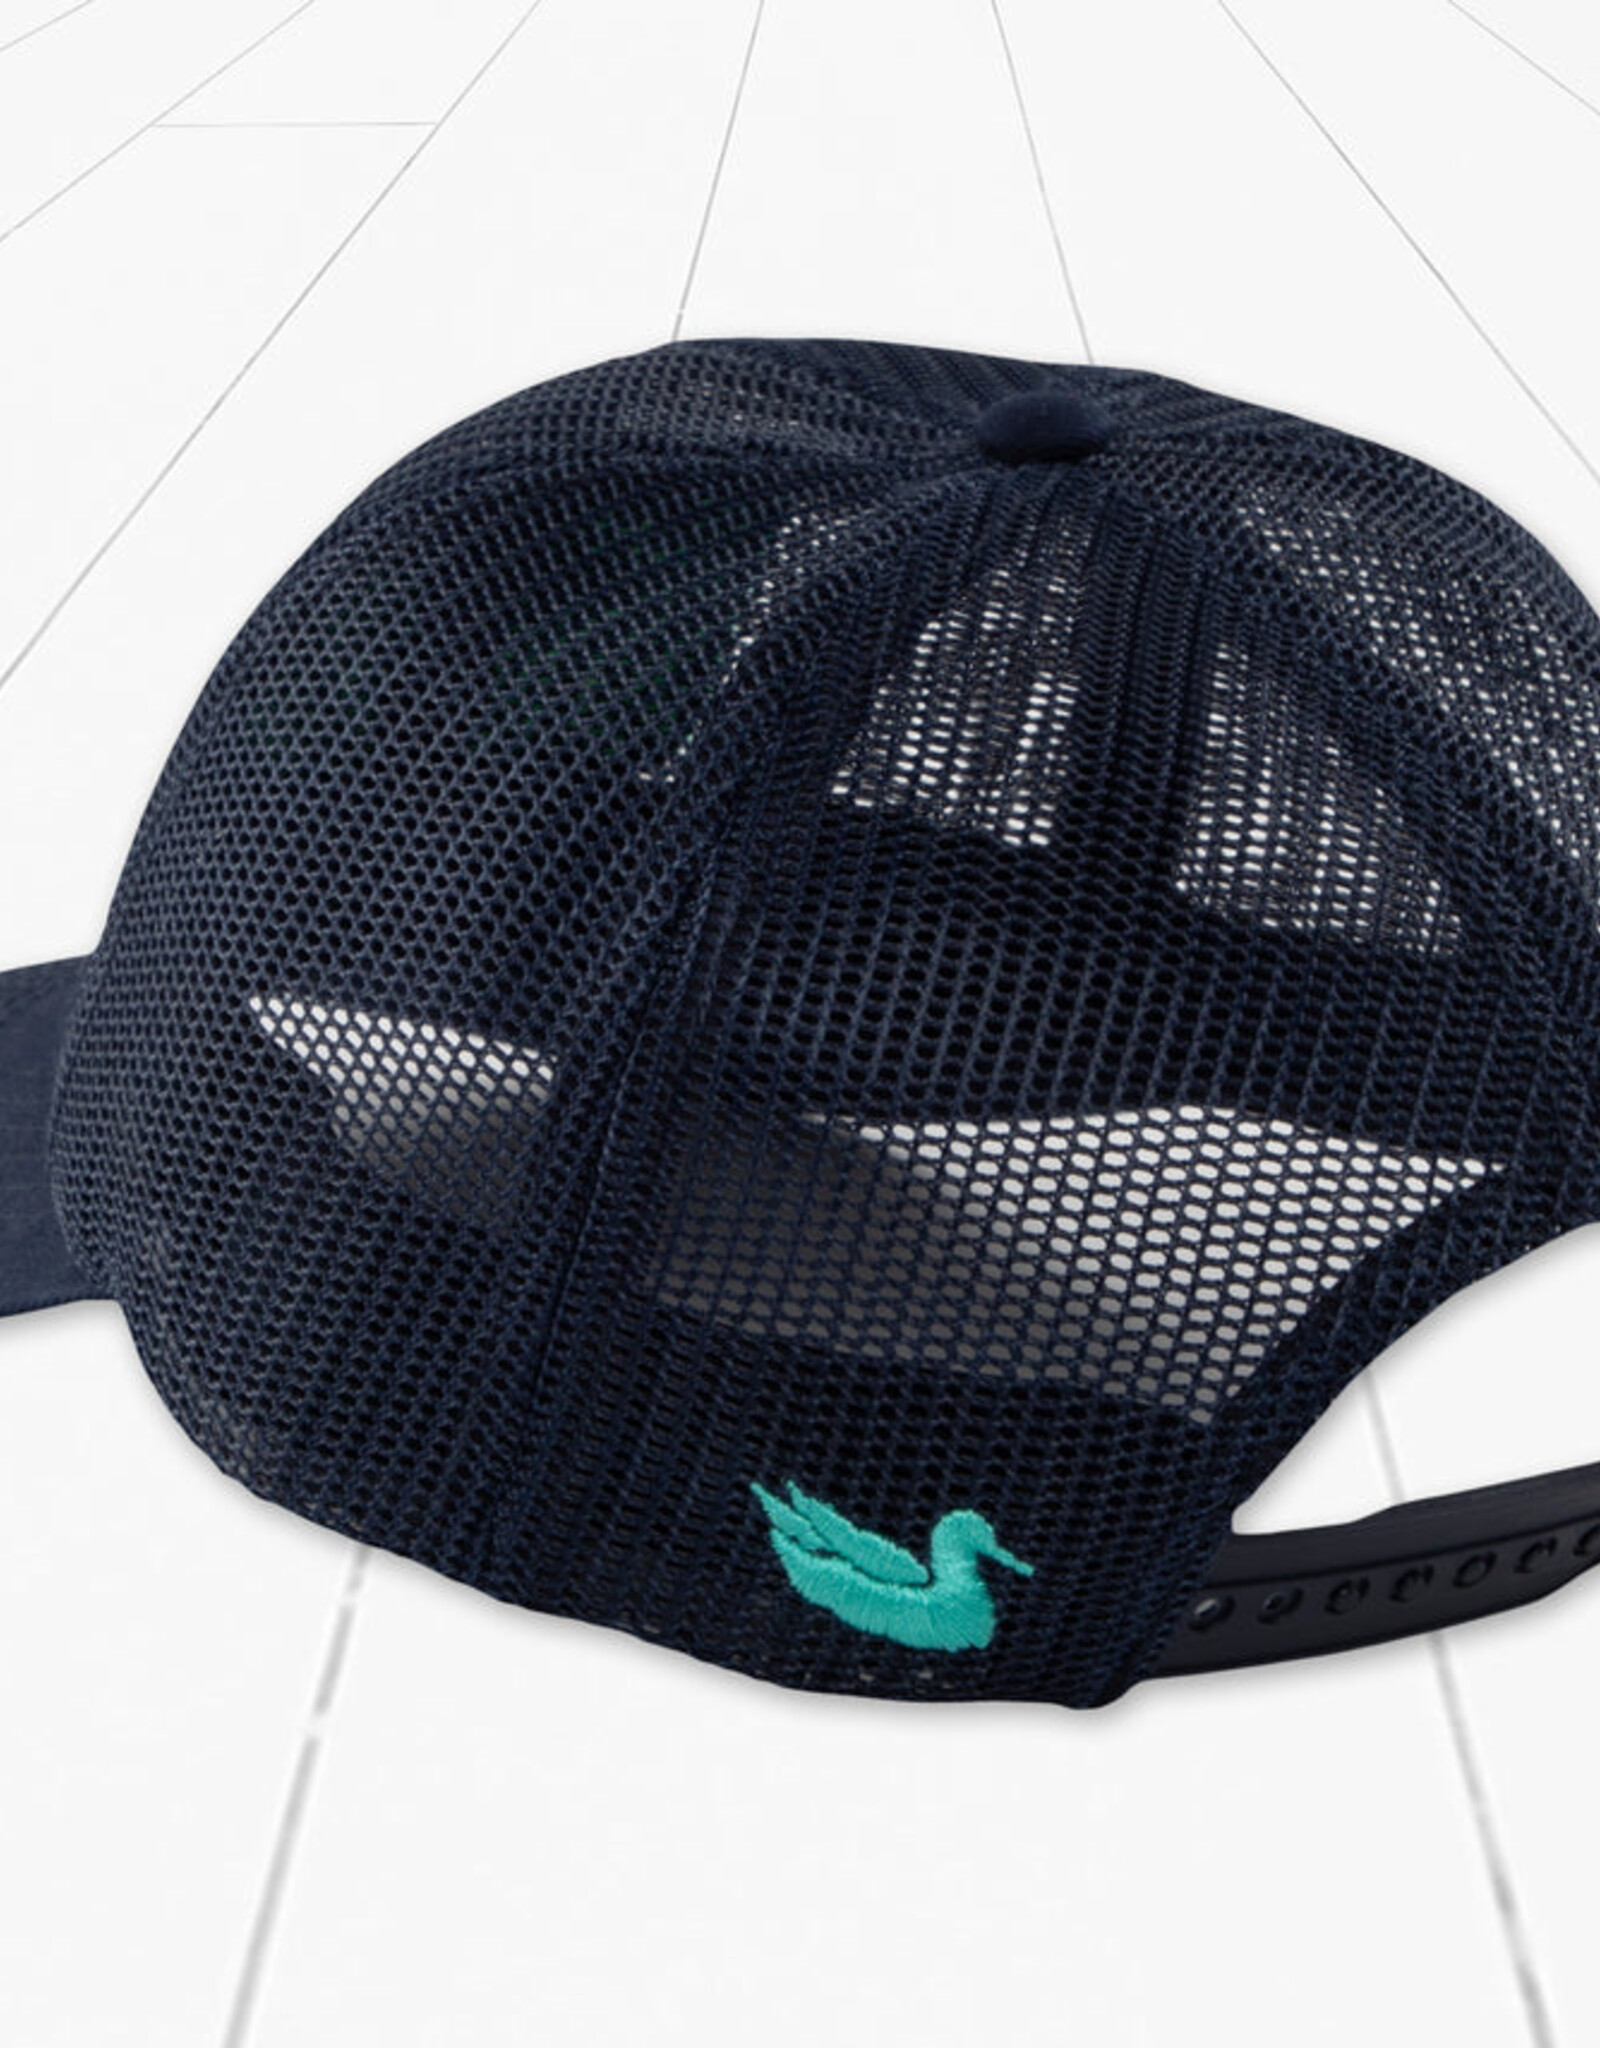 Southern Marsh Southern Marsh Performance Mesh Hat- Offroad